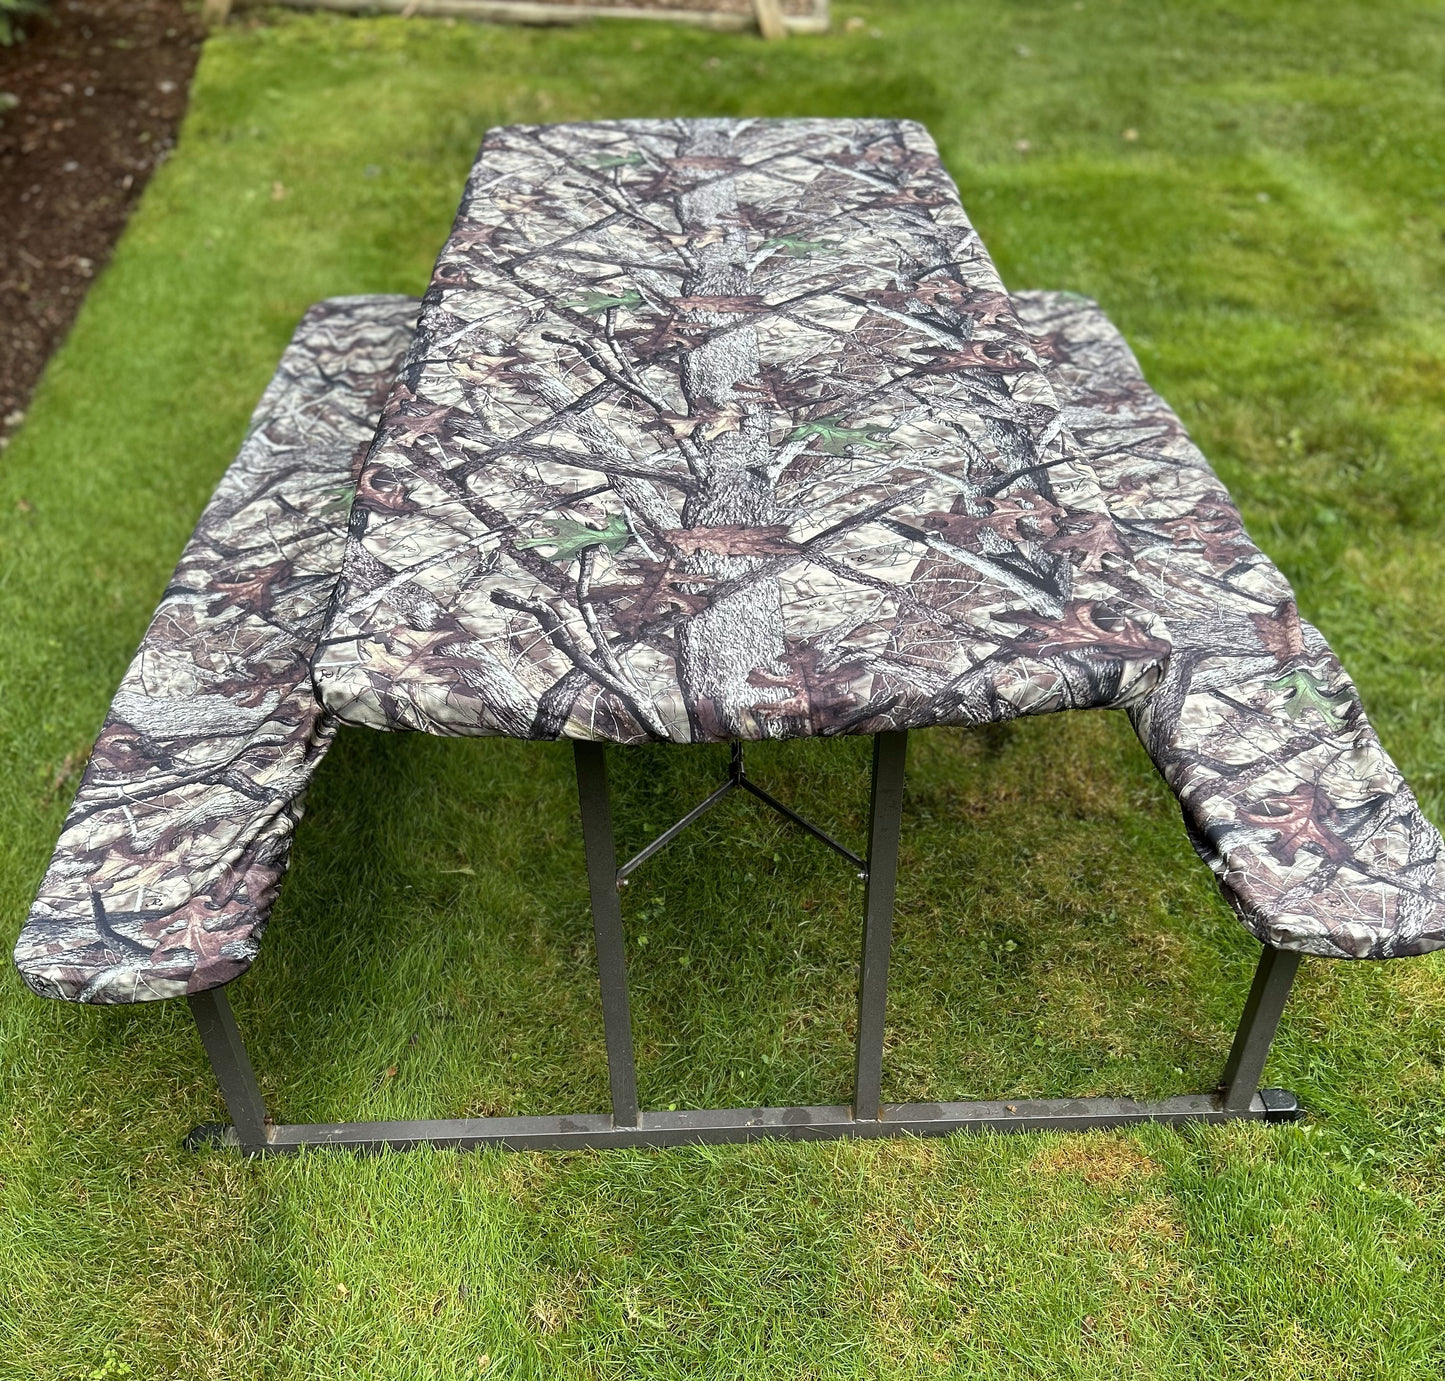 TRUETIMBER® Camo Picnic Table Cover and Bench Covers (set) with Elastic Fit